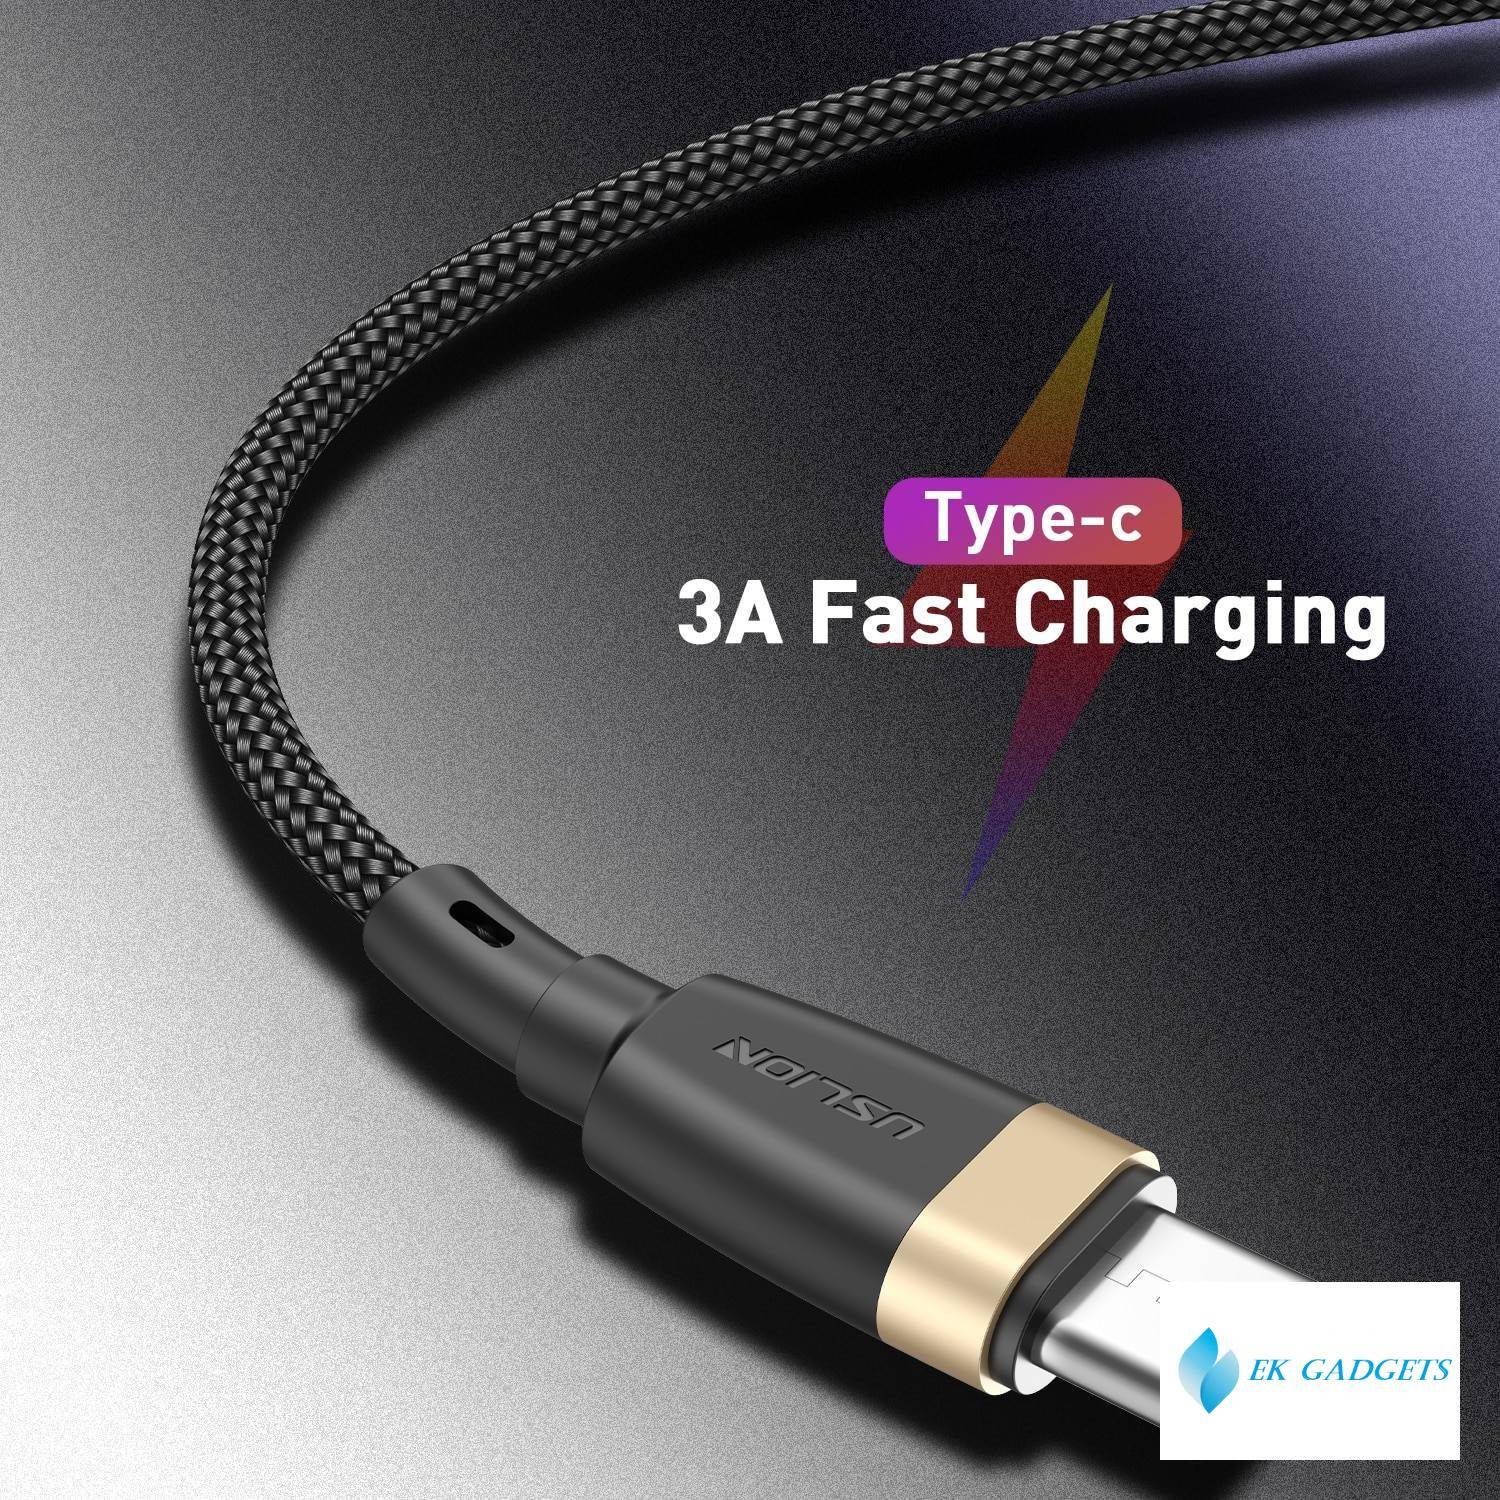 USB Type C Cable for Samsung S10 S9 S8 3A Fast Charging Type-C Phone Charge Wire USB C Cable for Xiaomi mi9 Redmi note 7